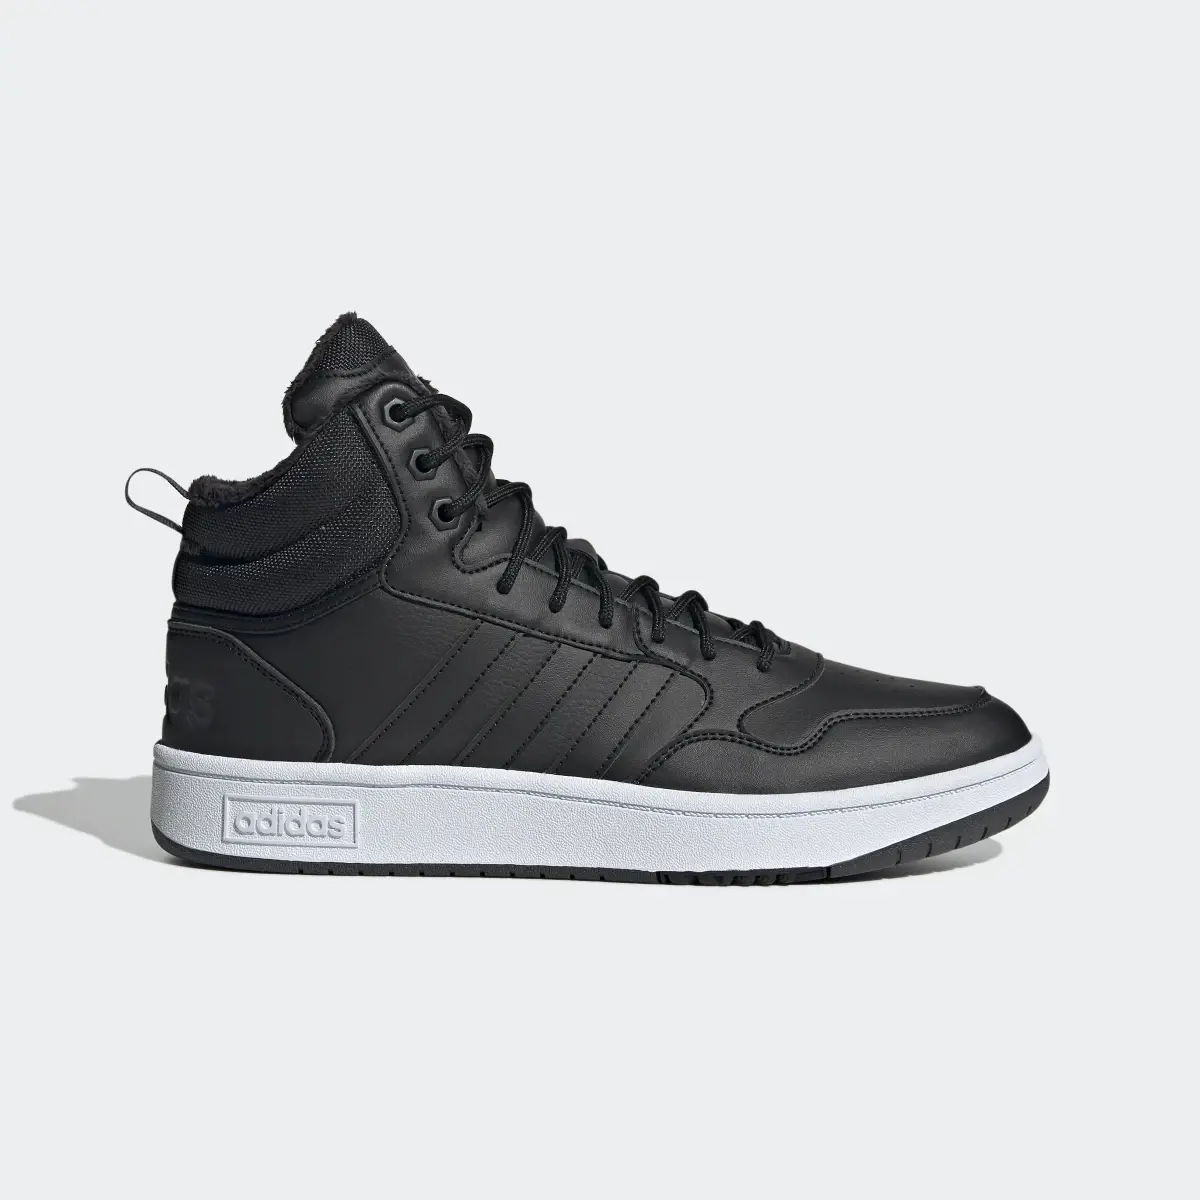 Adidas Hoops 3.0 Mid Lifestyle Basketball Classic Fur Lining Winterized Schuh. 2